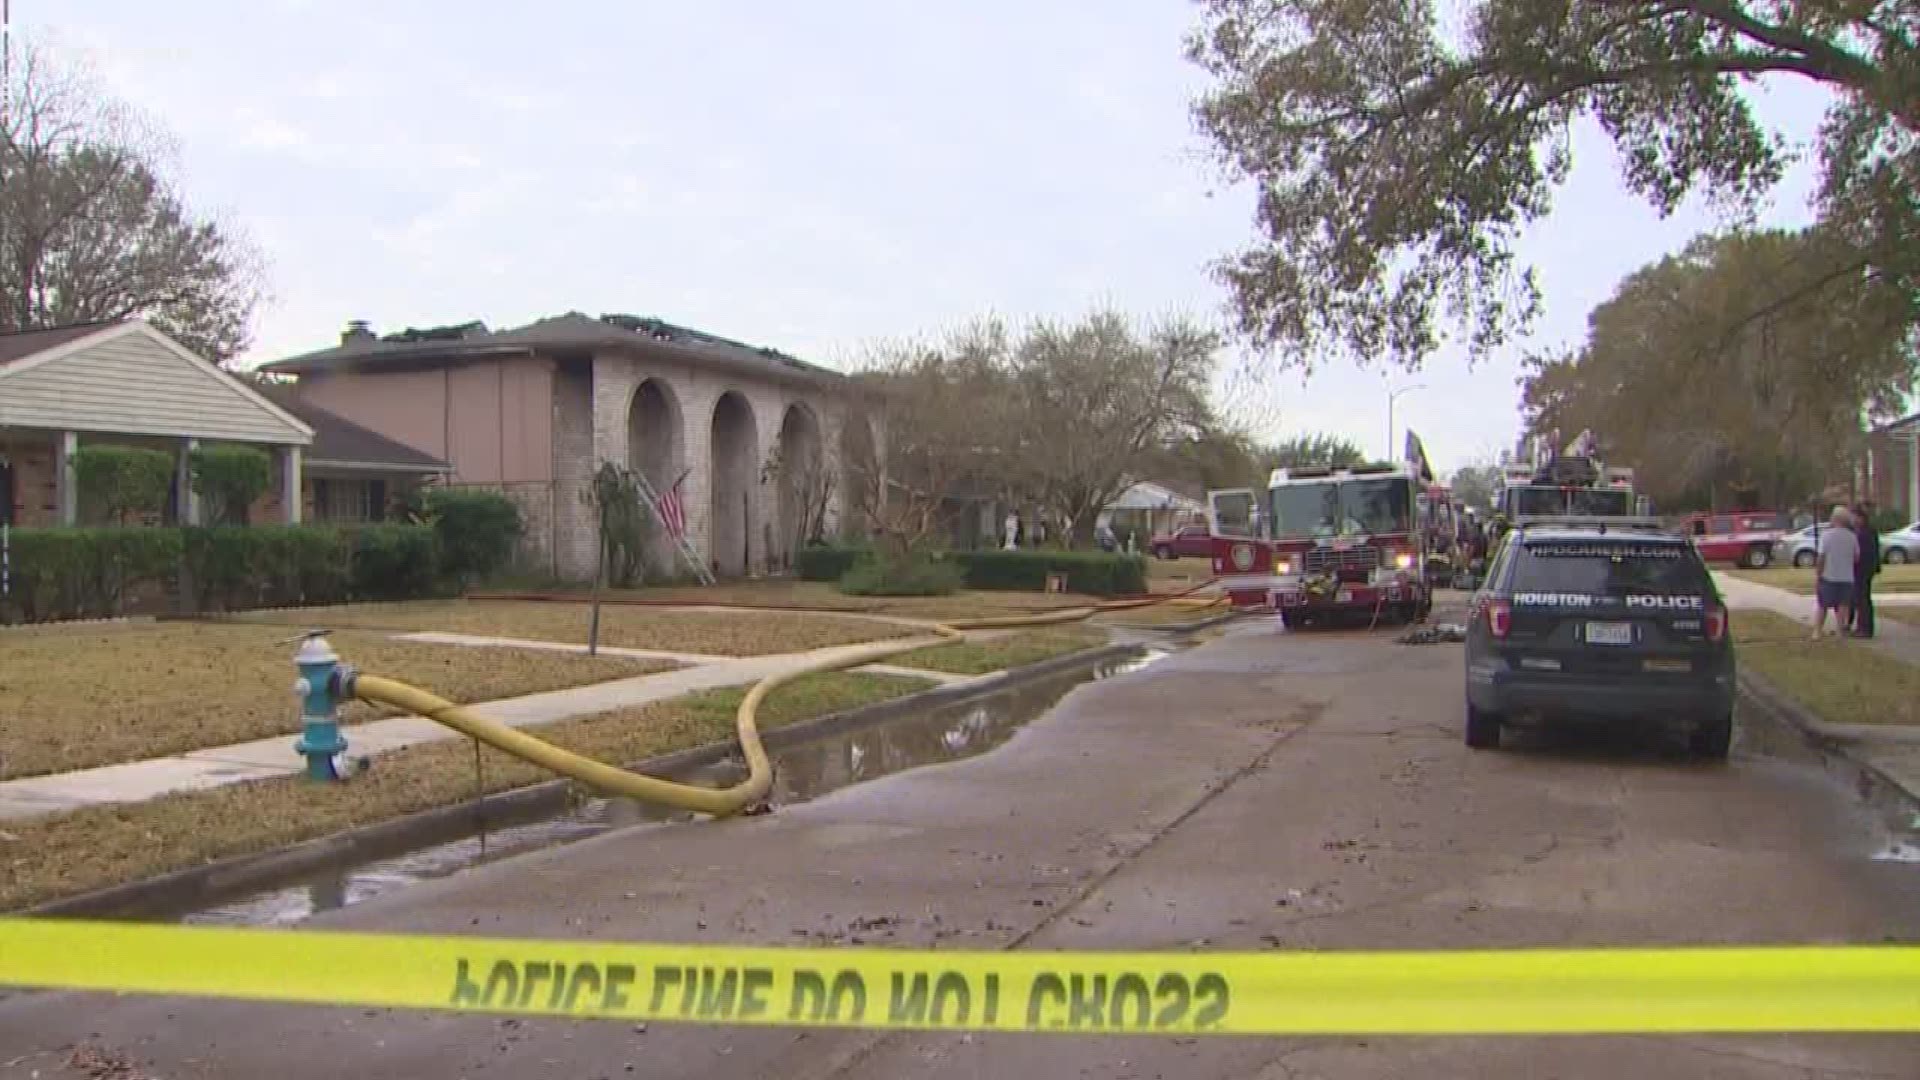 An 83-year-old woman is dead after a fire broke out in her southeast Houston home Tuesday morning. Firefighters found the woman unconscious at the bottom of the stairs. It is unclear how the fire started.